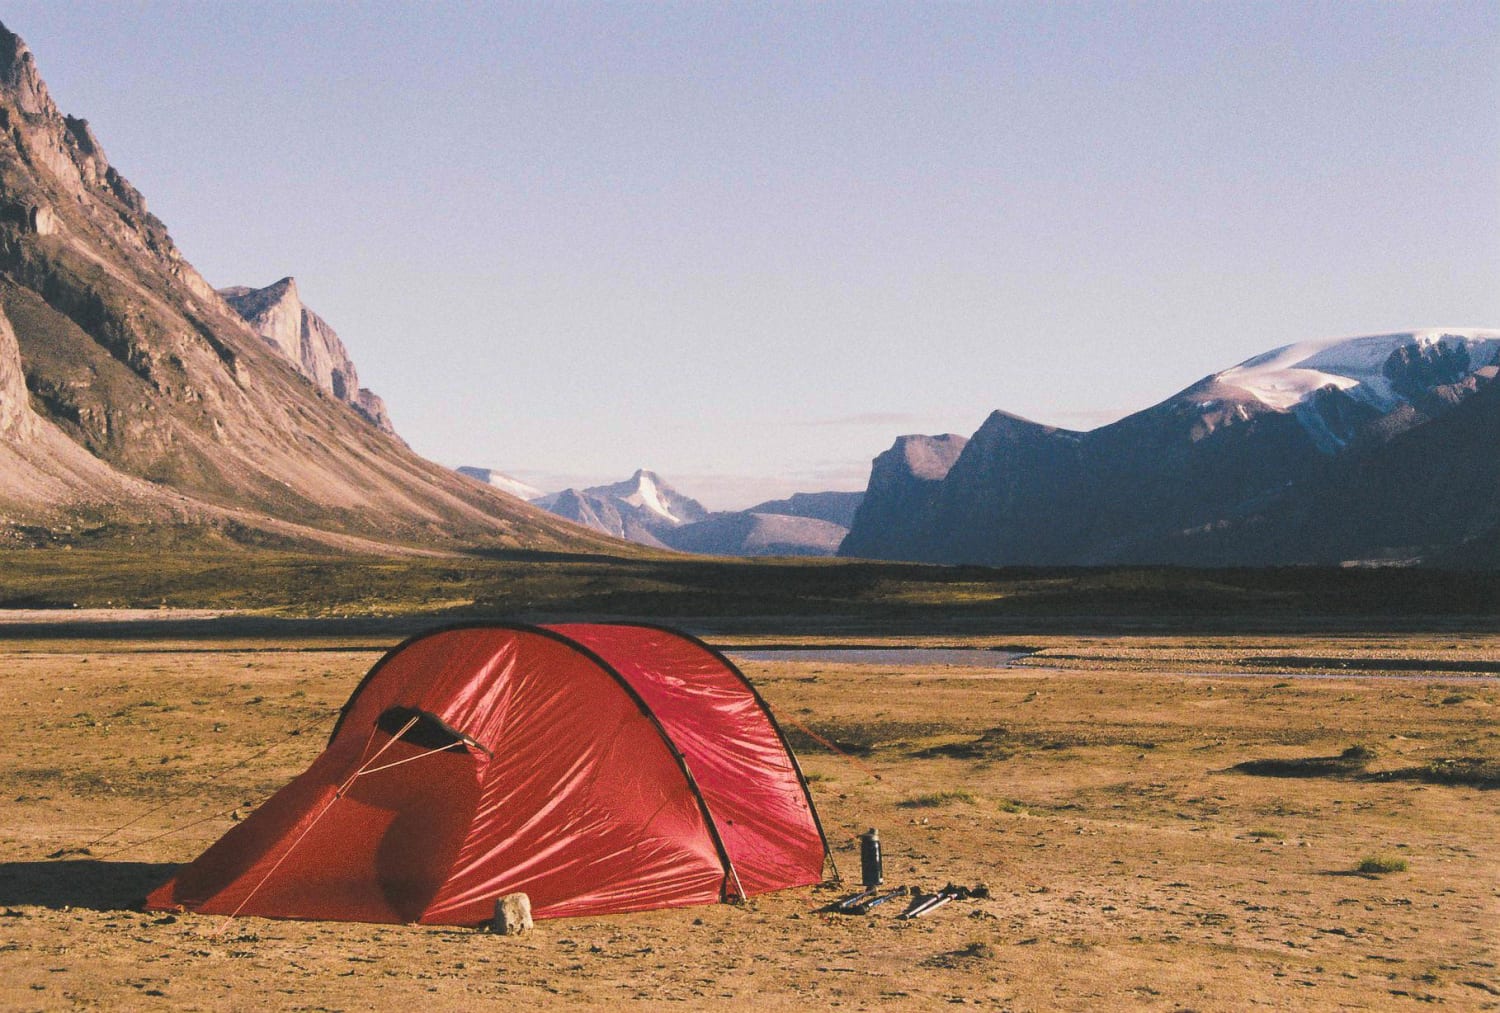 Not a bad camp spot! Up on Baffin island, Canada.